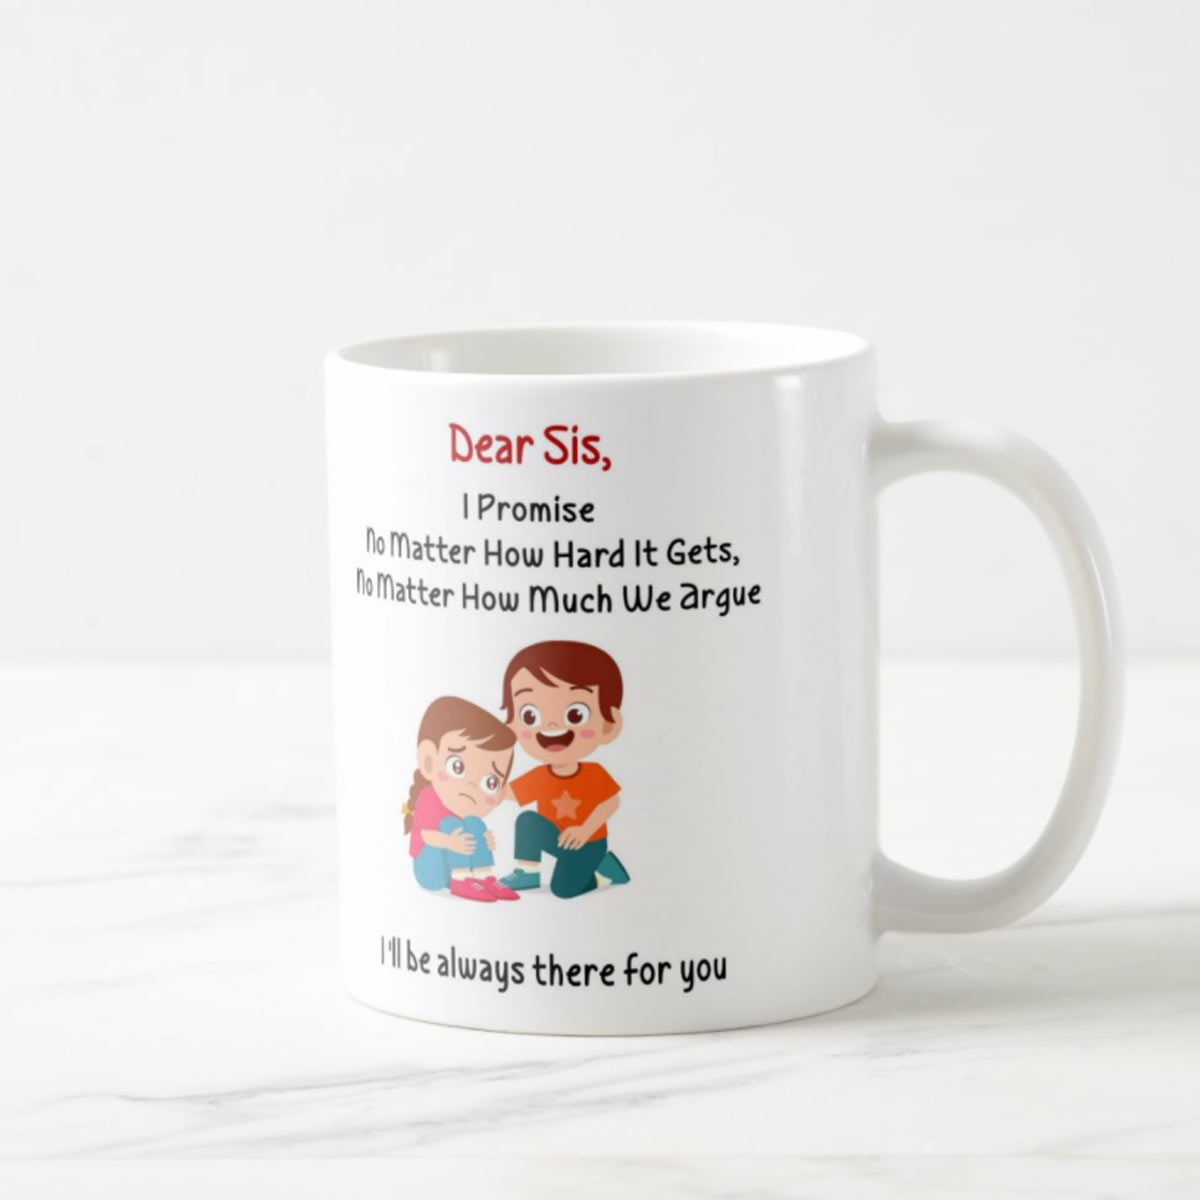 Dear Sis I'll always be there for you Mug